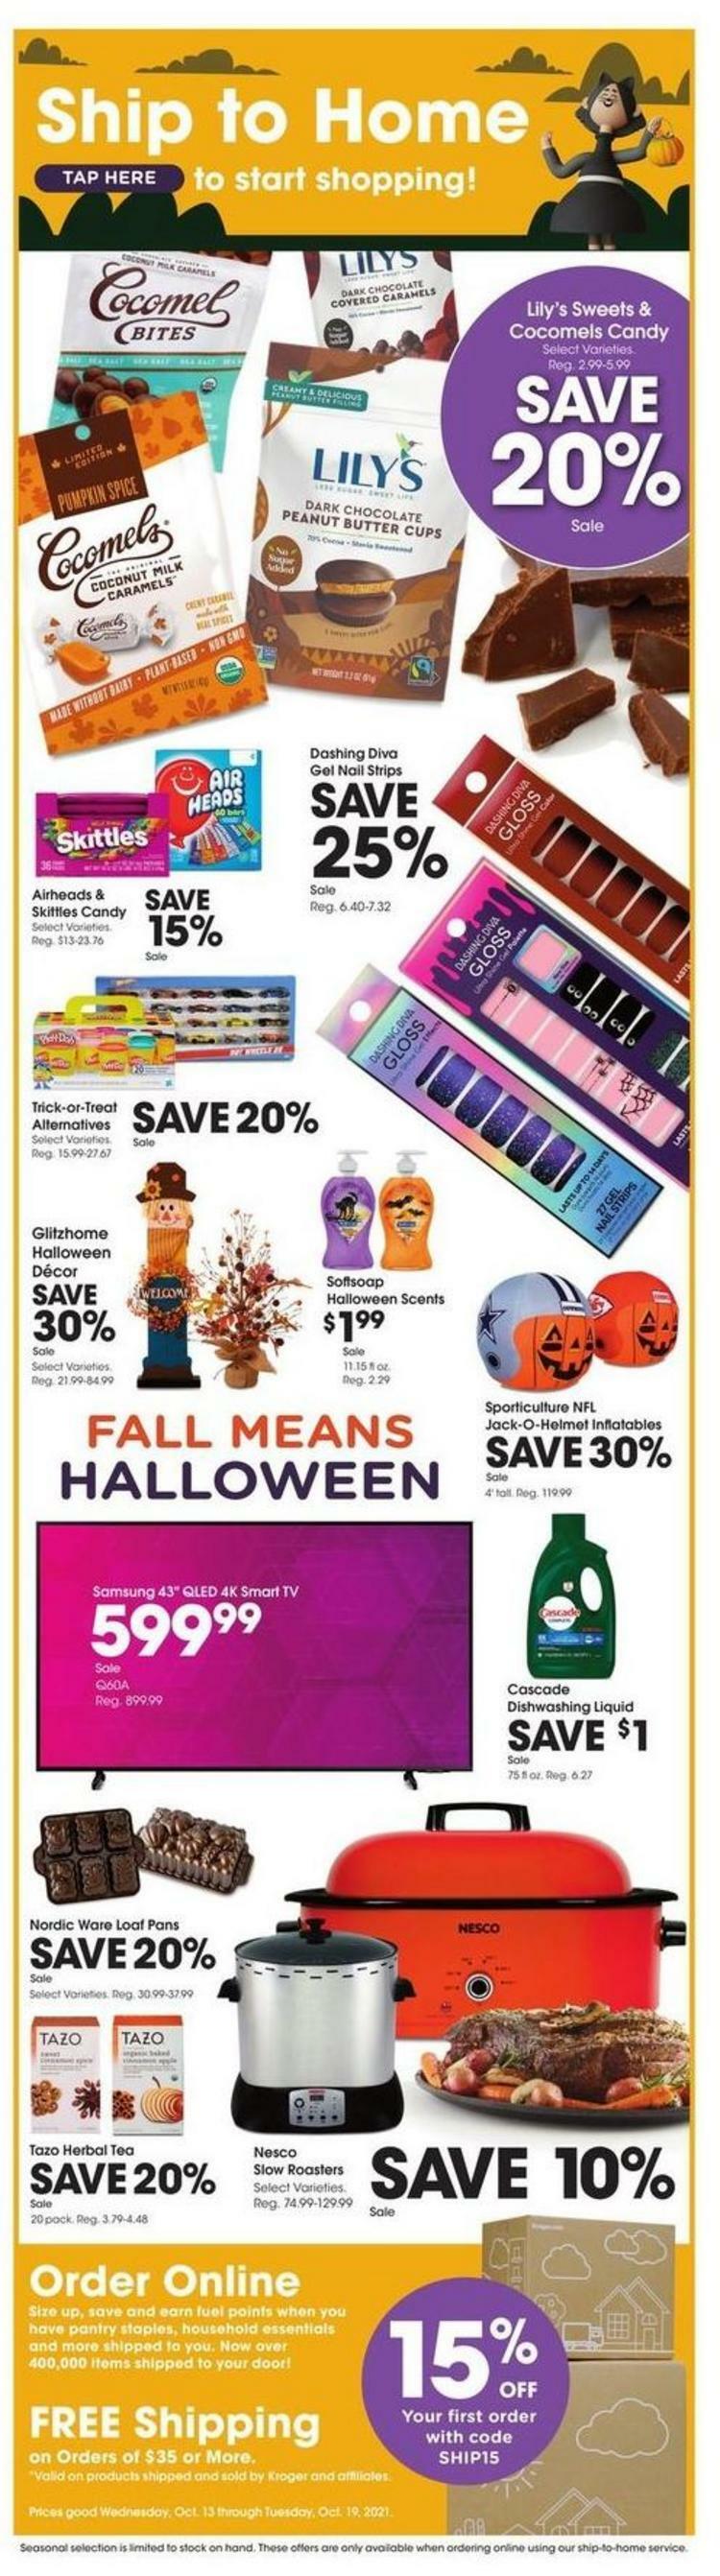 Fred Meyer Weekly Ad from October 13